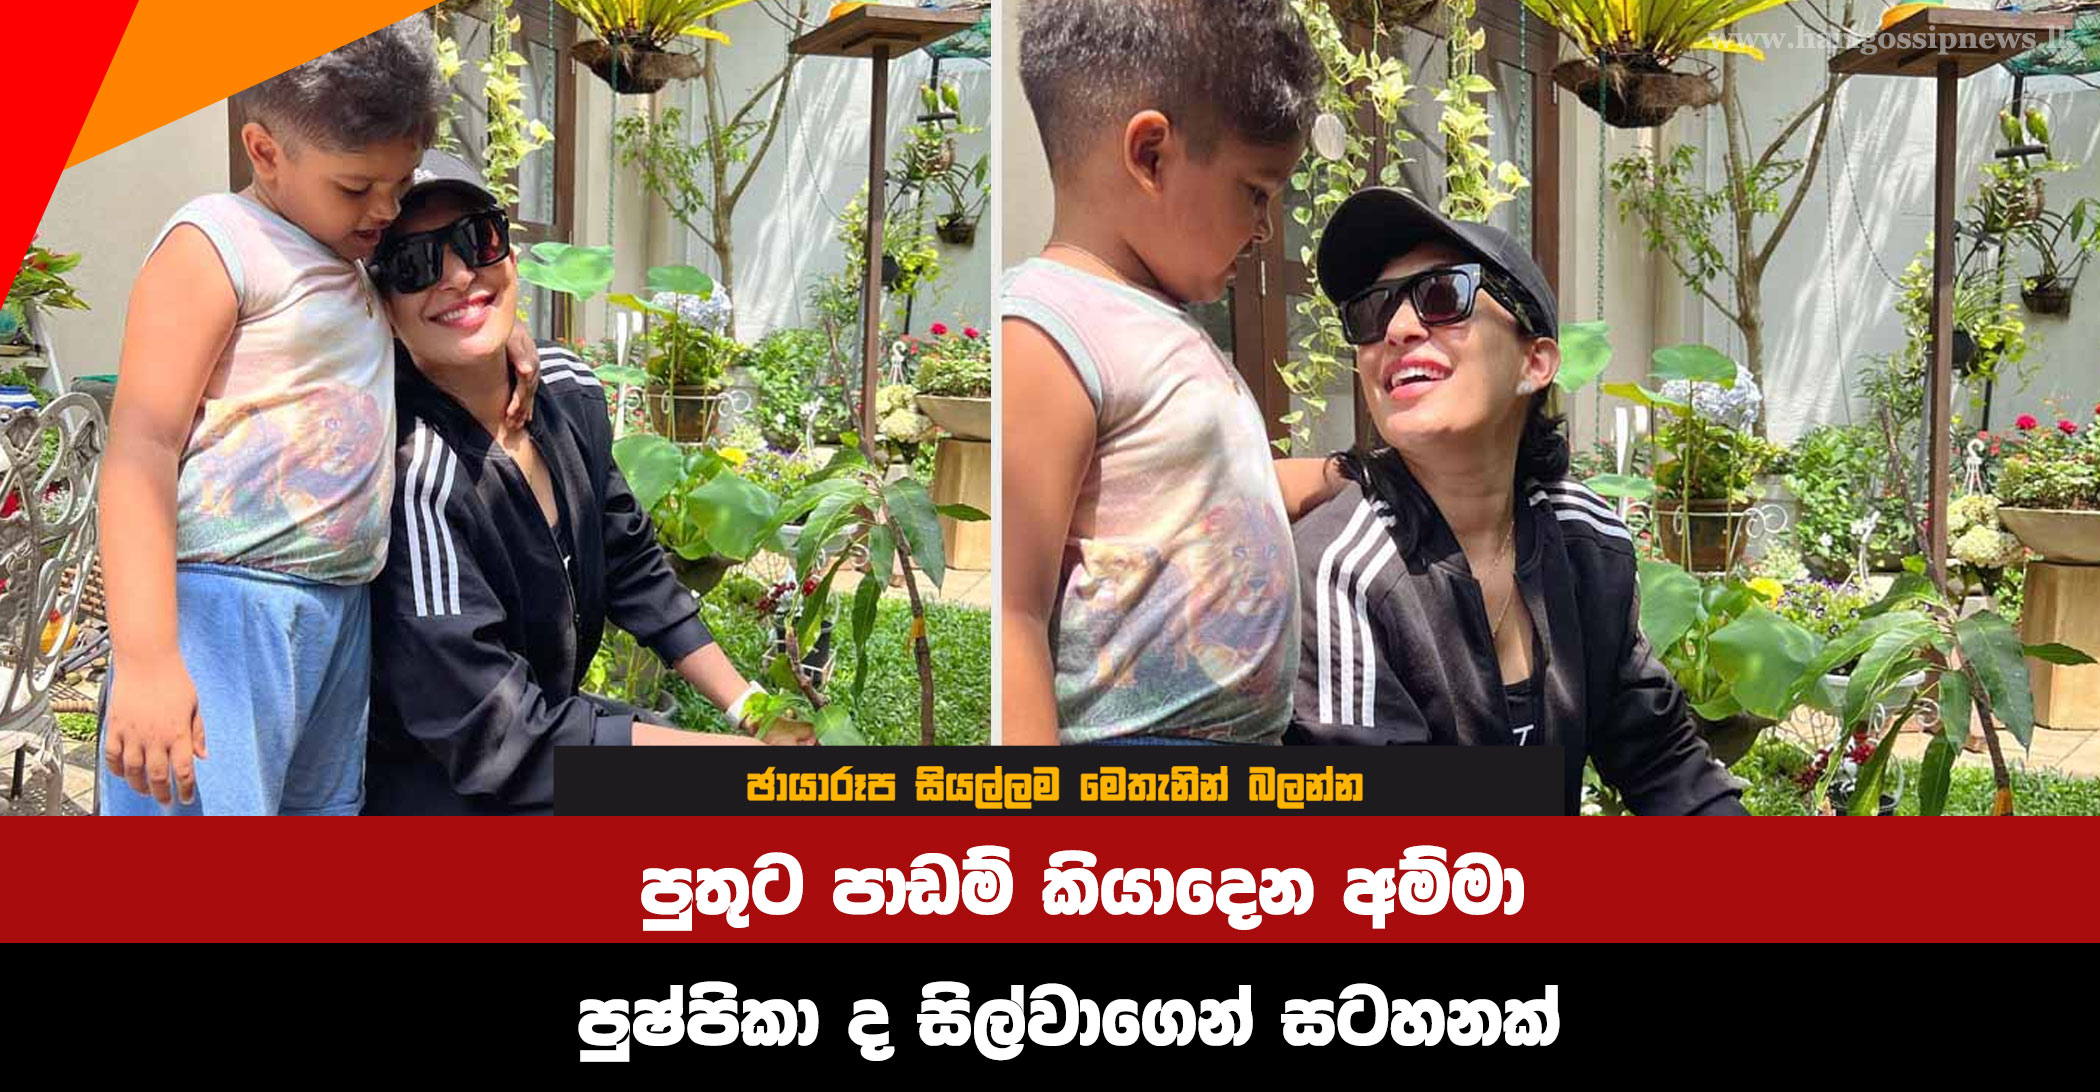 A-mother-teaching-lessons-to-her-son---A-loving-note-from-Pushpika-de-Silva